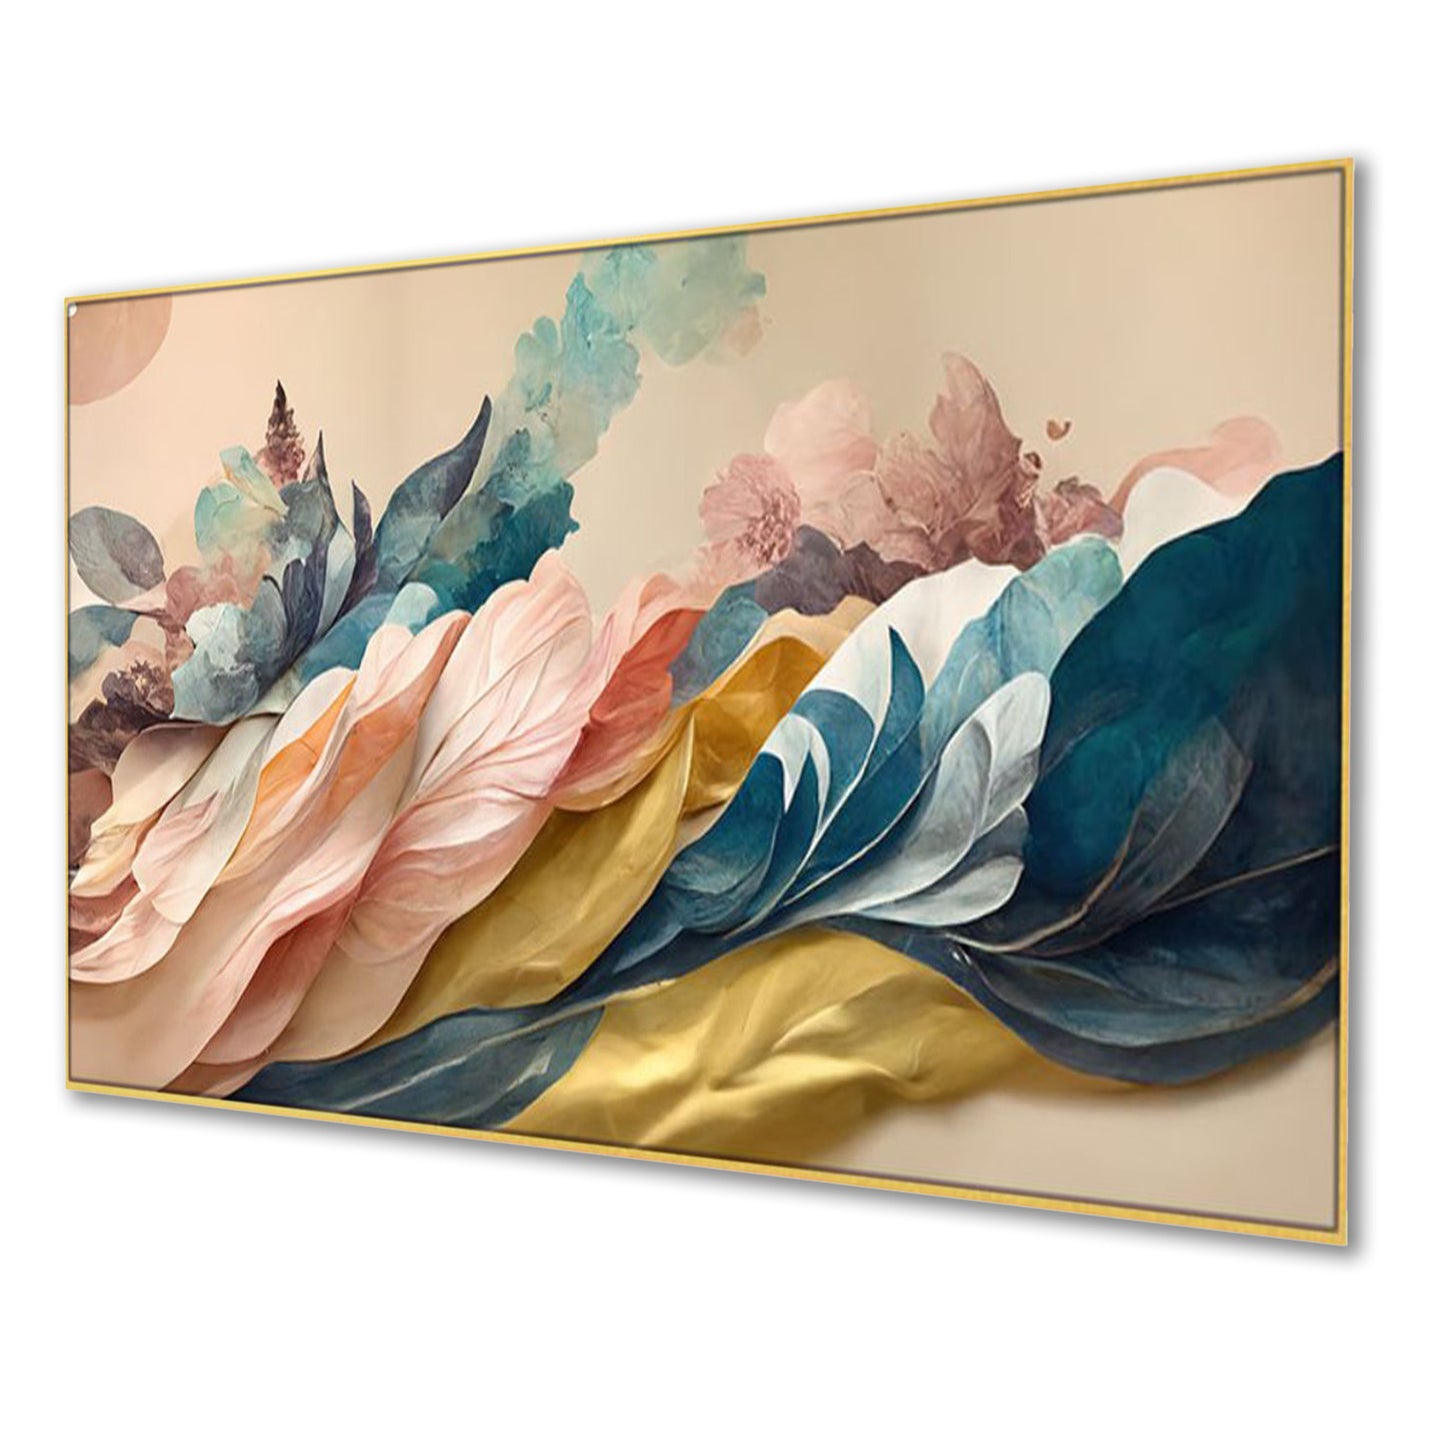 Floral Elegance: Nature's Vivid Beauty Wall Painting